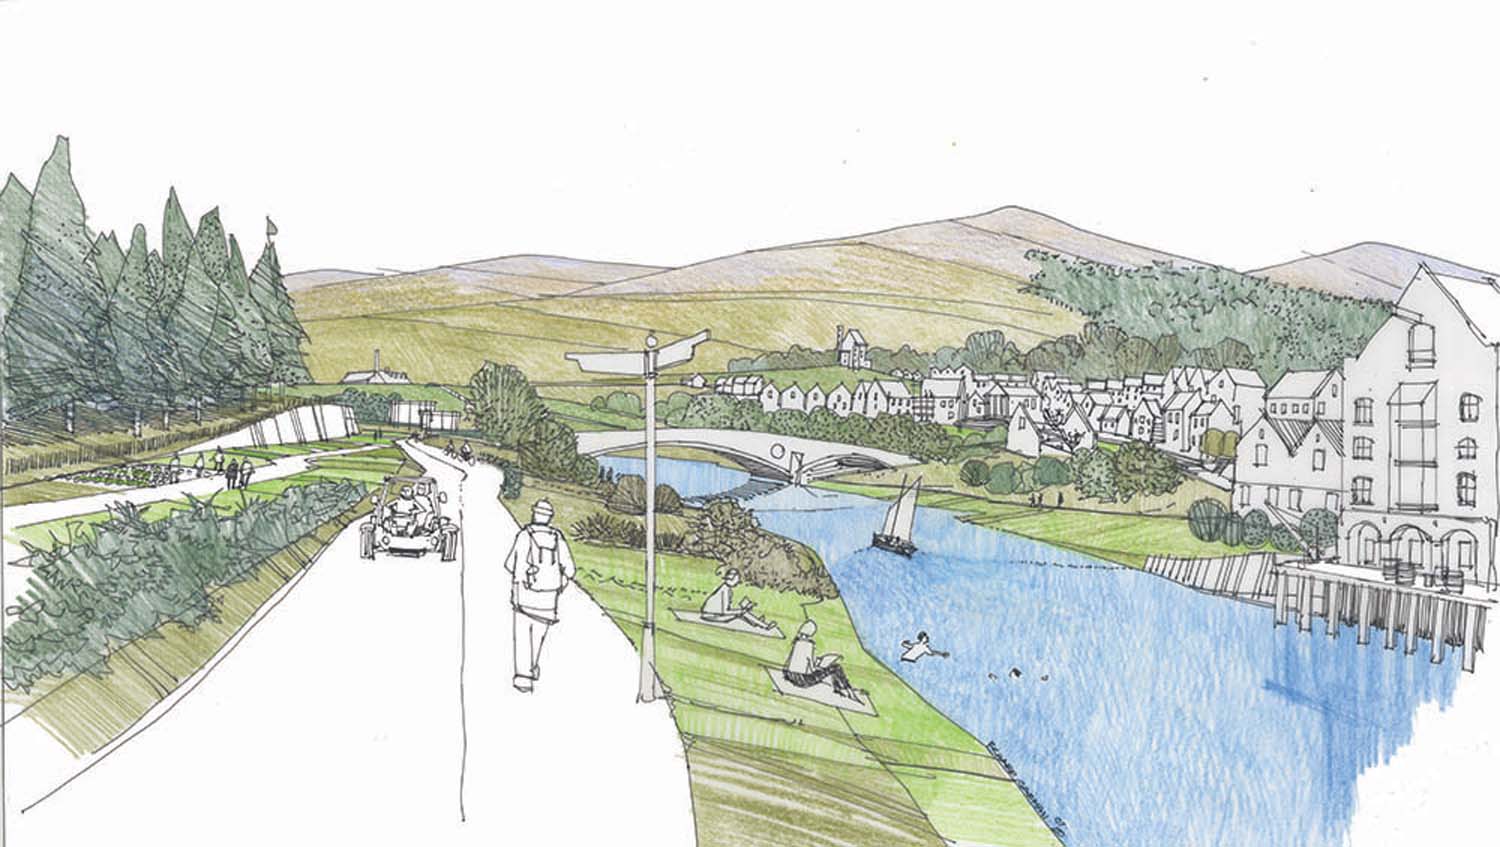 An architectural sketch of people walking on a pathway and relaxing by a river beside a town centre. 